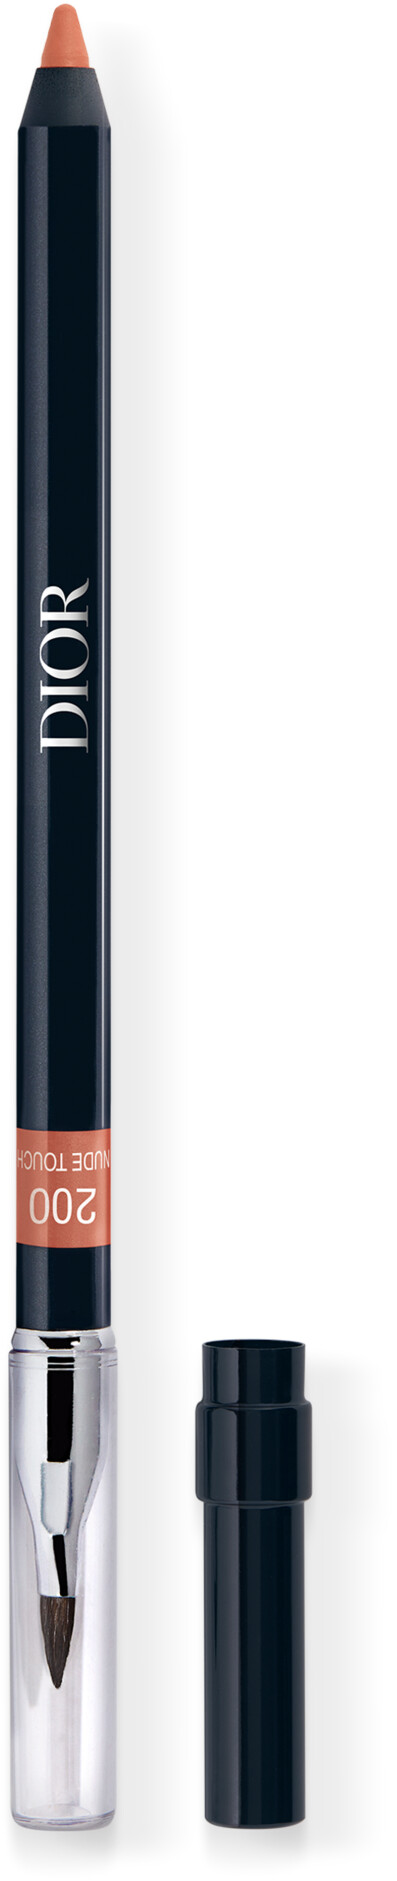 DIOR Rouge Dior Contour Lip Liner Pencil 1.2g 200 - Nude Touch